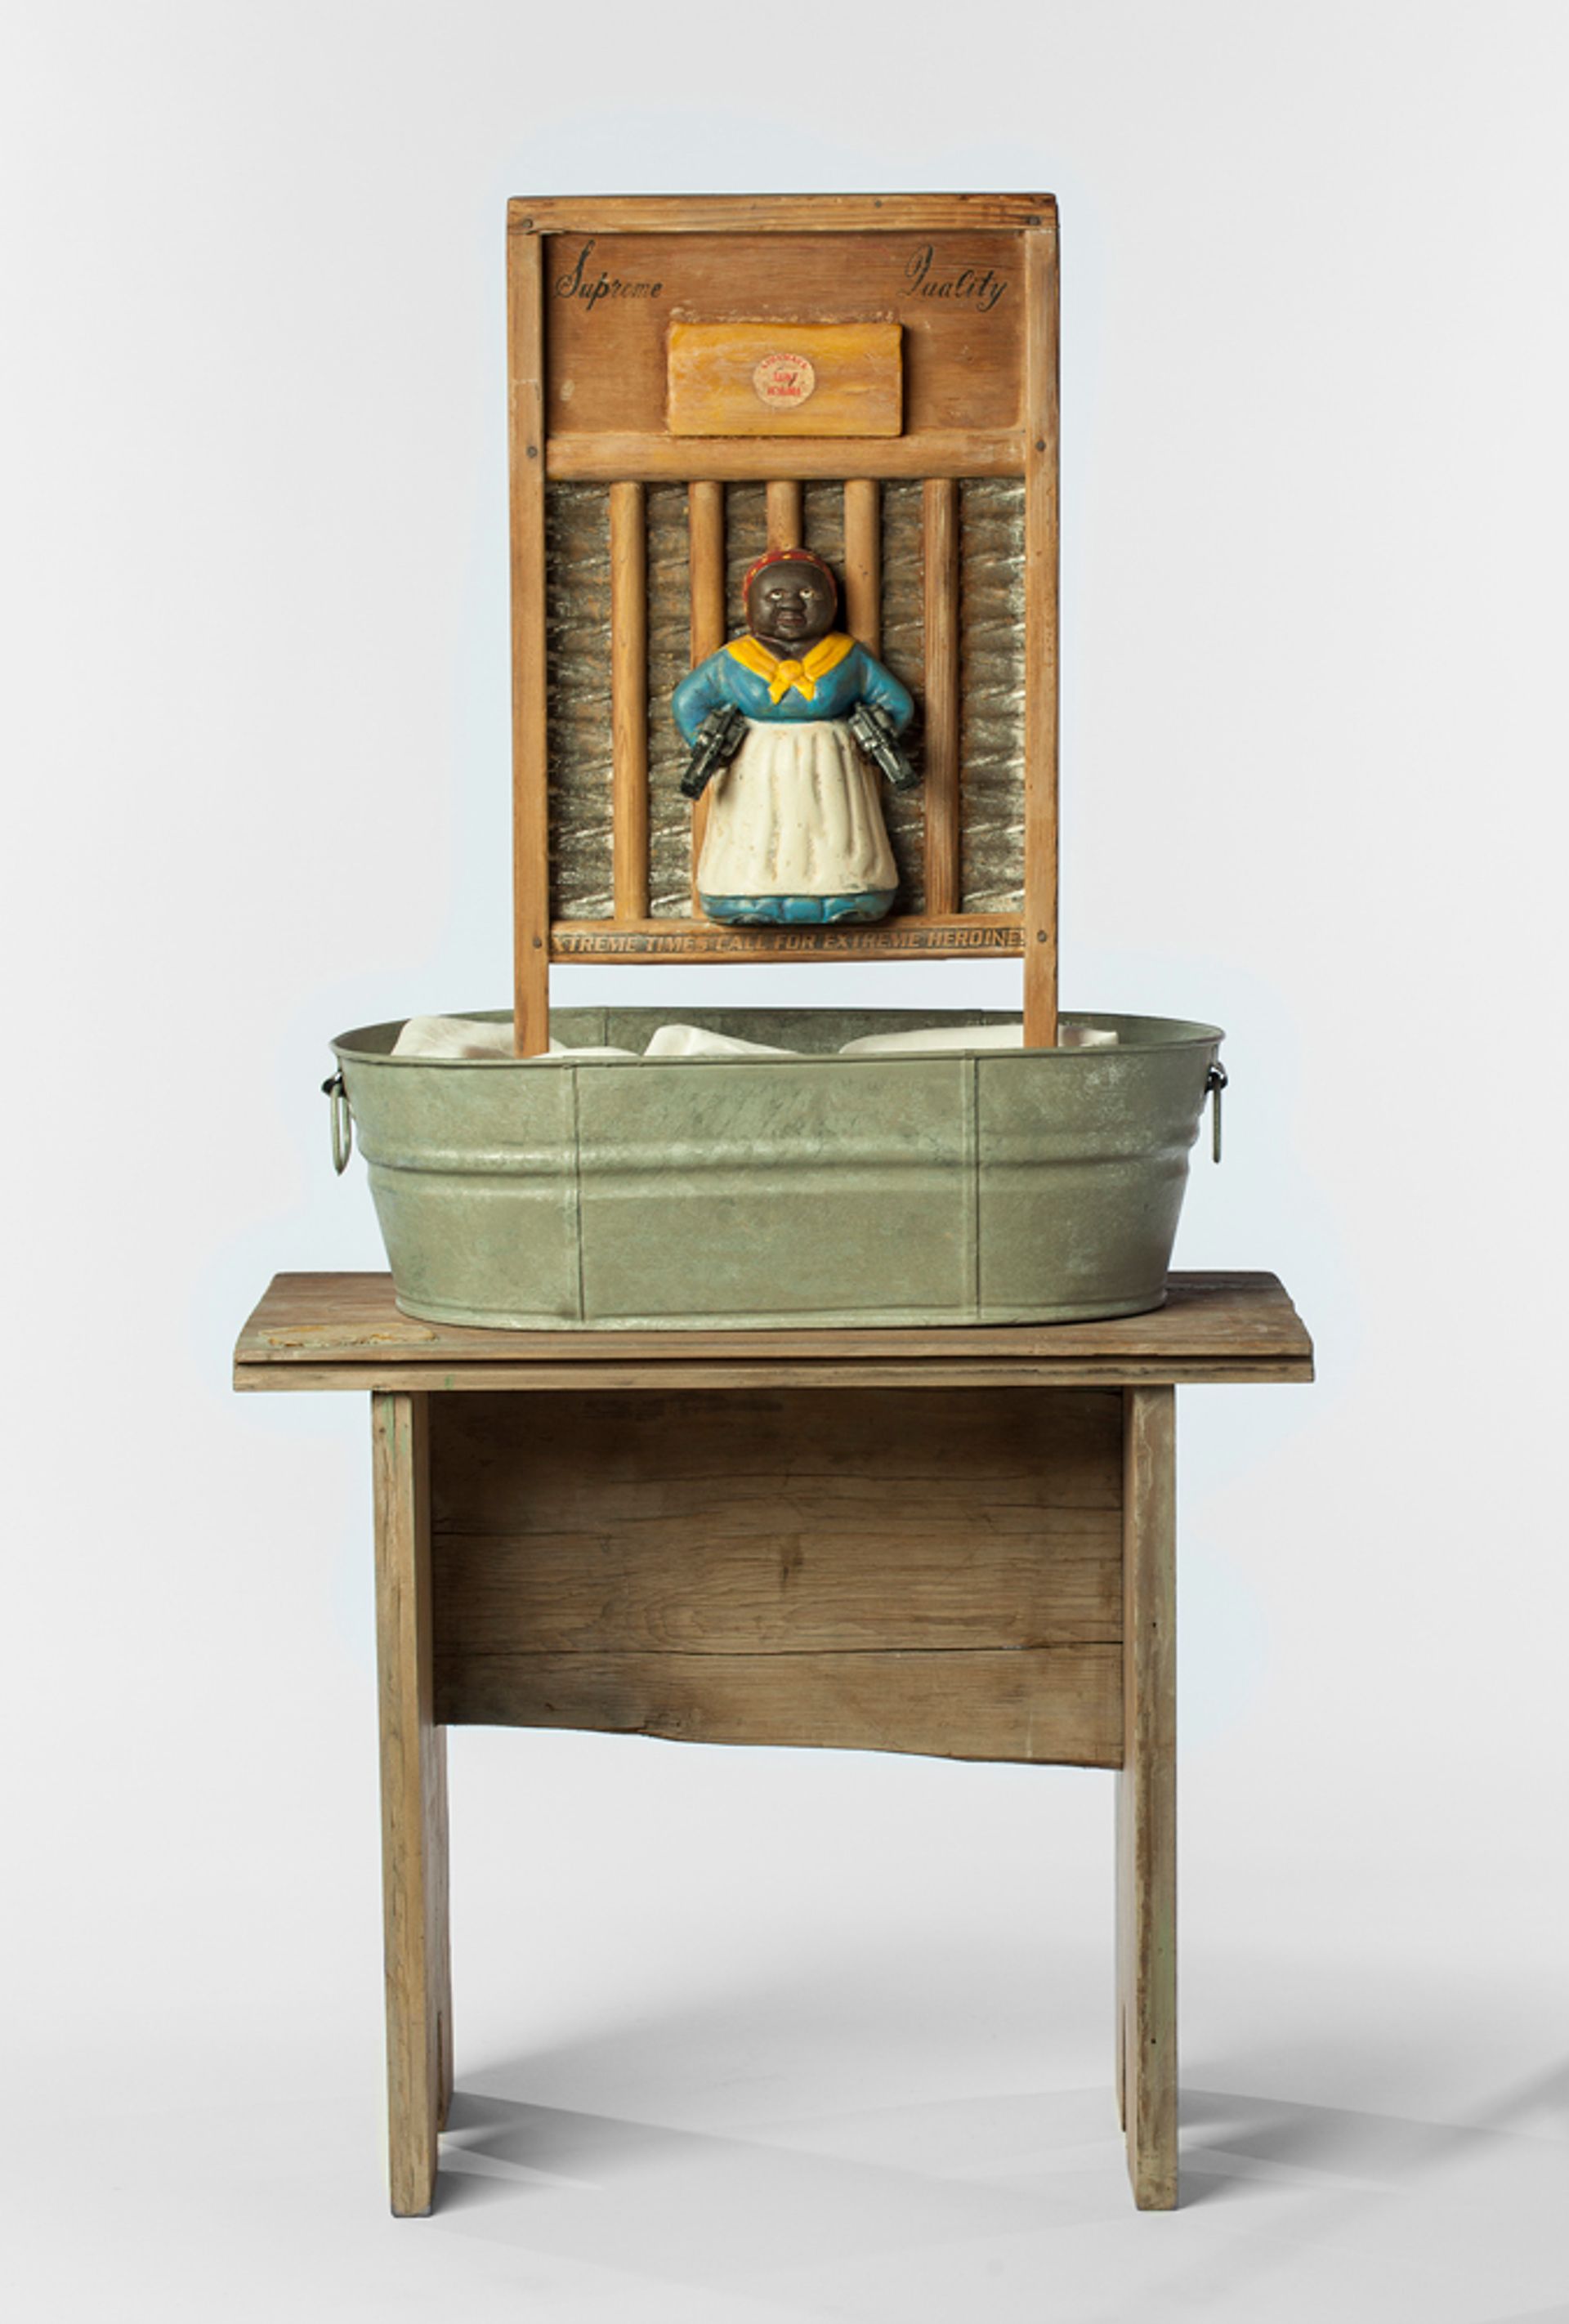 Betye Saar, Supreme Quality, (1998) Courtesy of the artist and Roberts Projects, Los Angeles, CA; Photo: Tim Lanterman, Scottsdale Museum of Contemporary Art